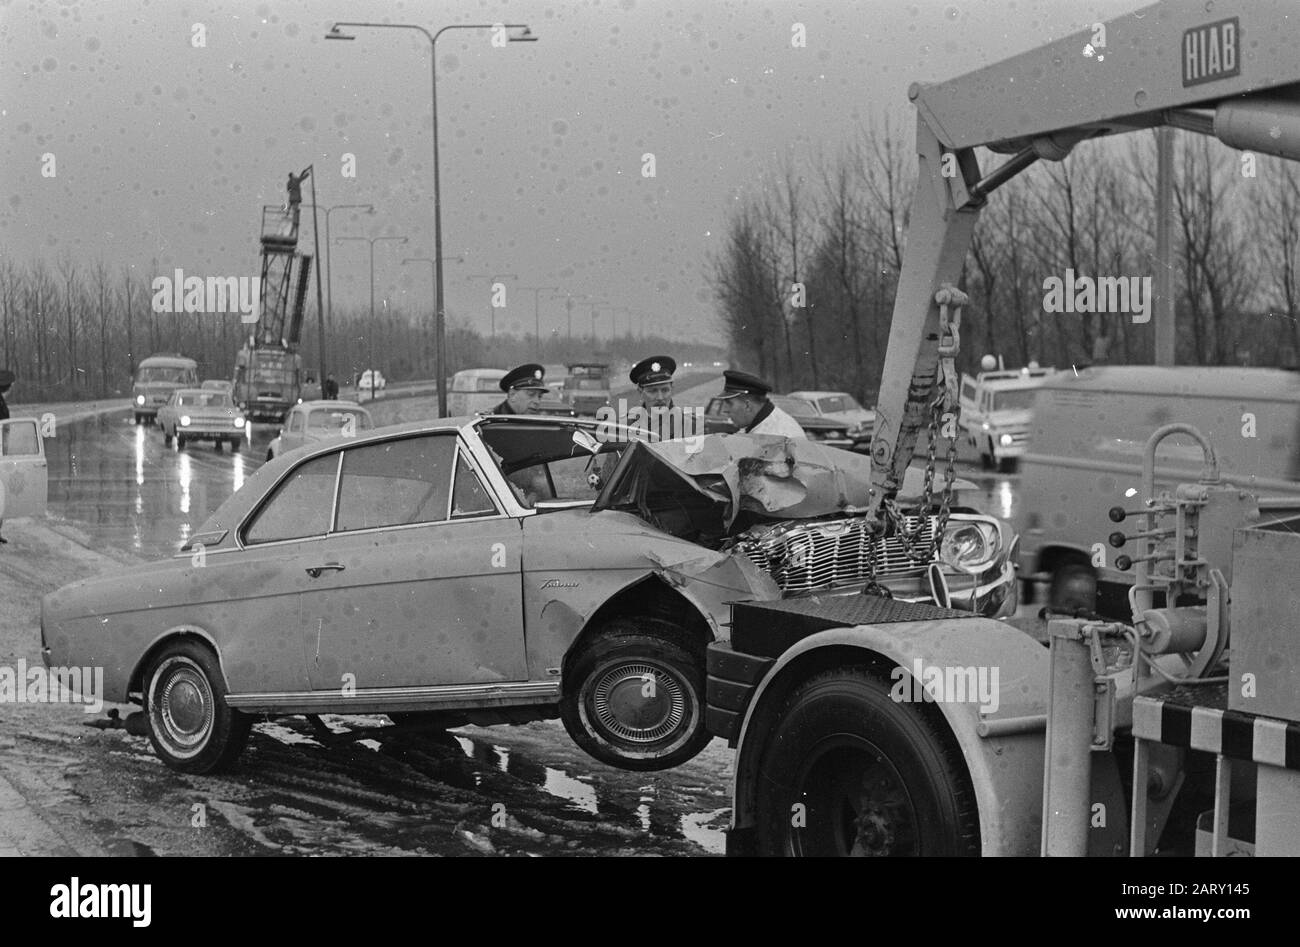 Two cars collide at Gooiseweg, one of the slipped cars Date: March 31, 1967 Keywords: cars, accidents Stock Photo